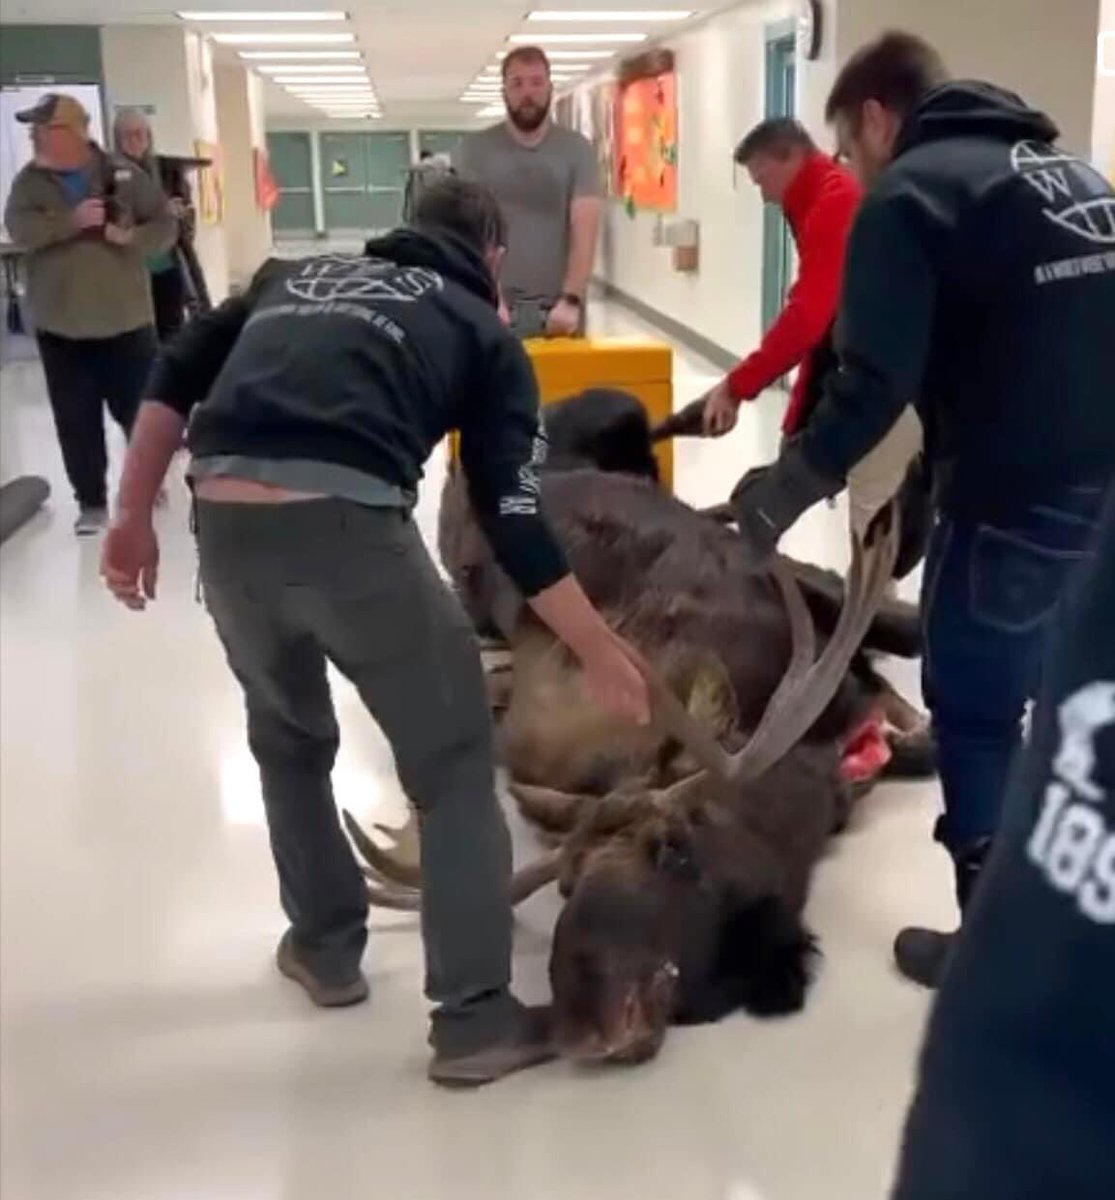 Today in Alaska, a Chugiak High School science teacher brought in a moose for his freshman class to start quartering and processing the meat.
Throughout this preparation, students will be learning about subsistence living and harvesting techniques.